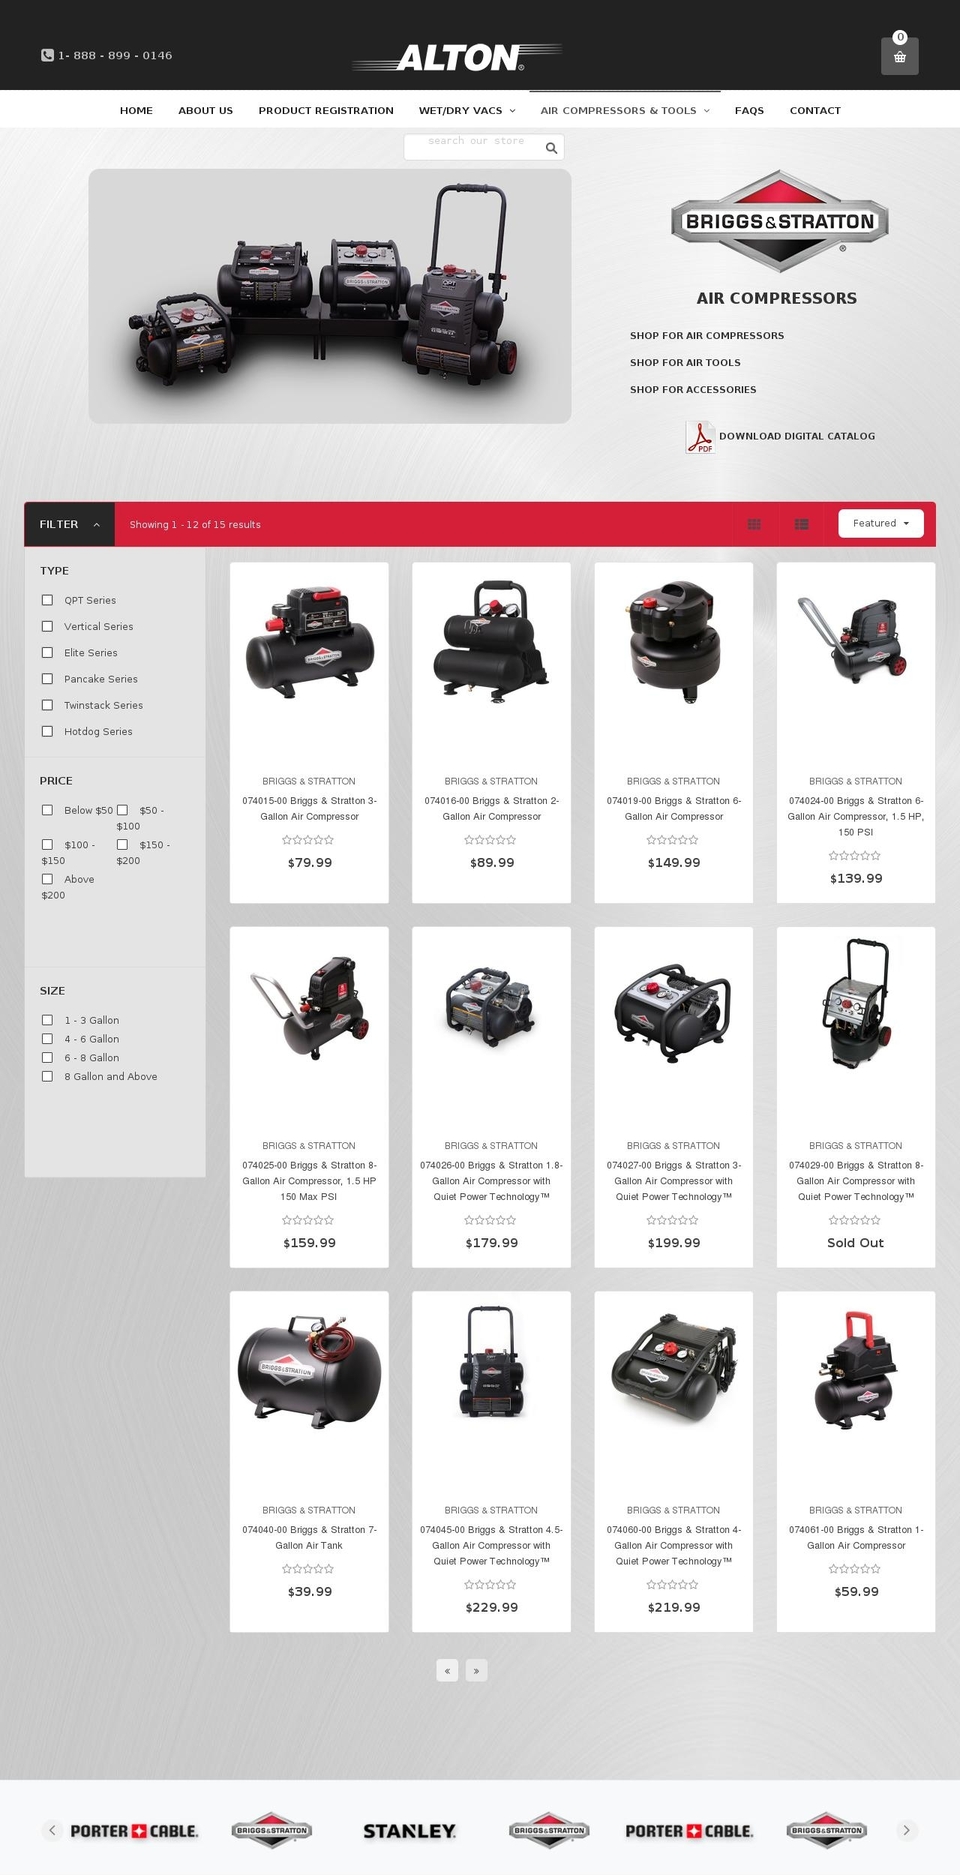 Theme Shopify theme site example bscompressors.com